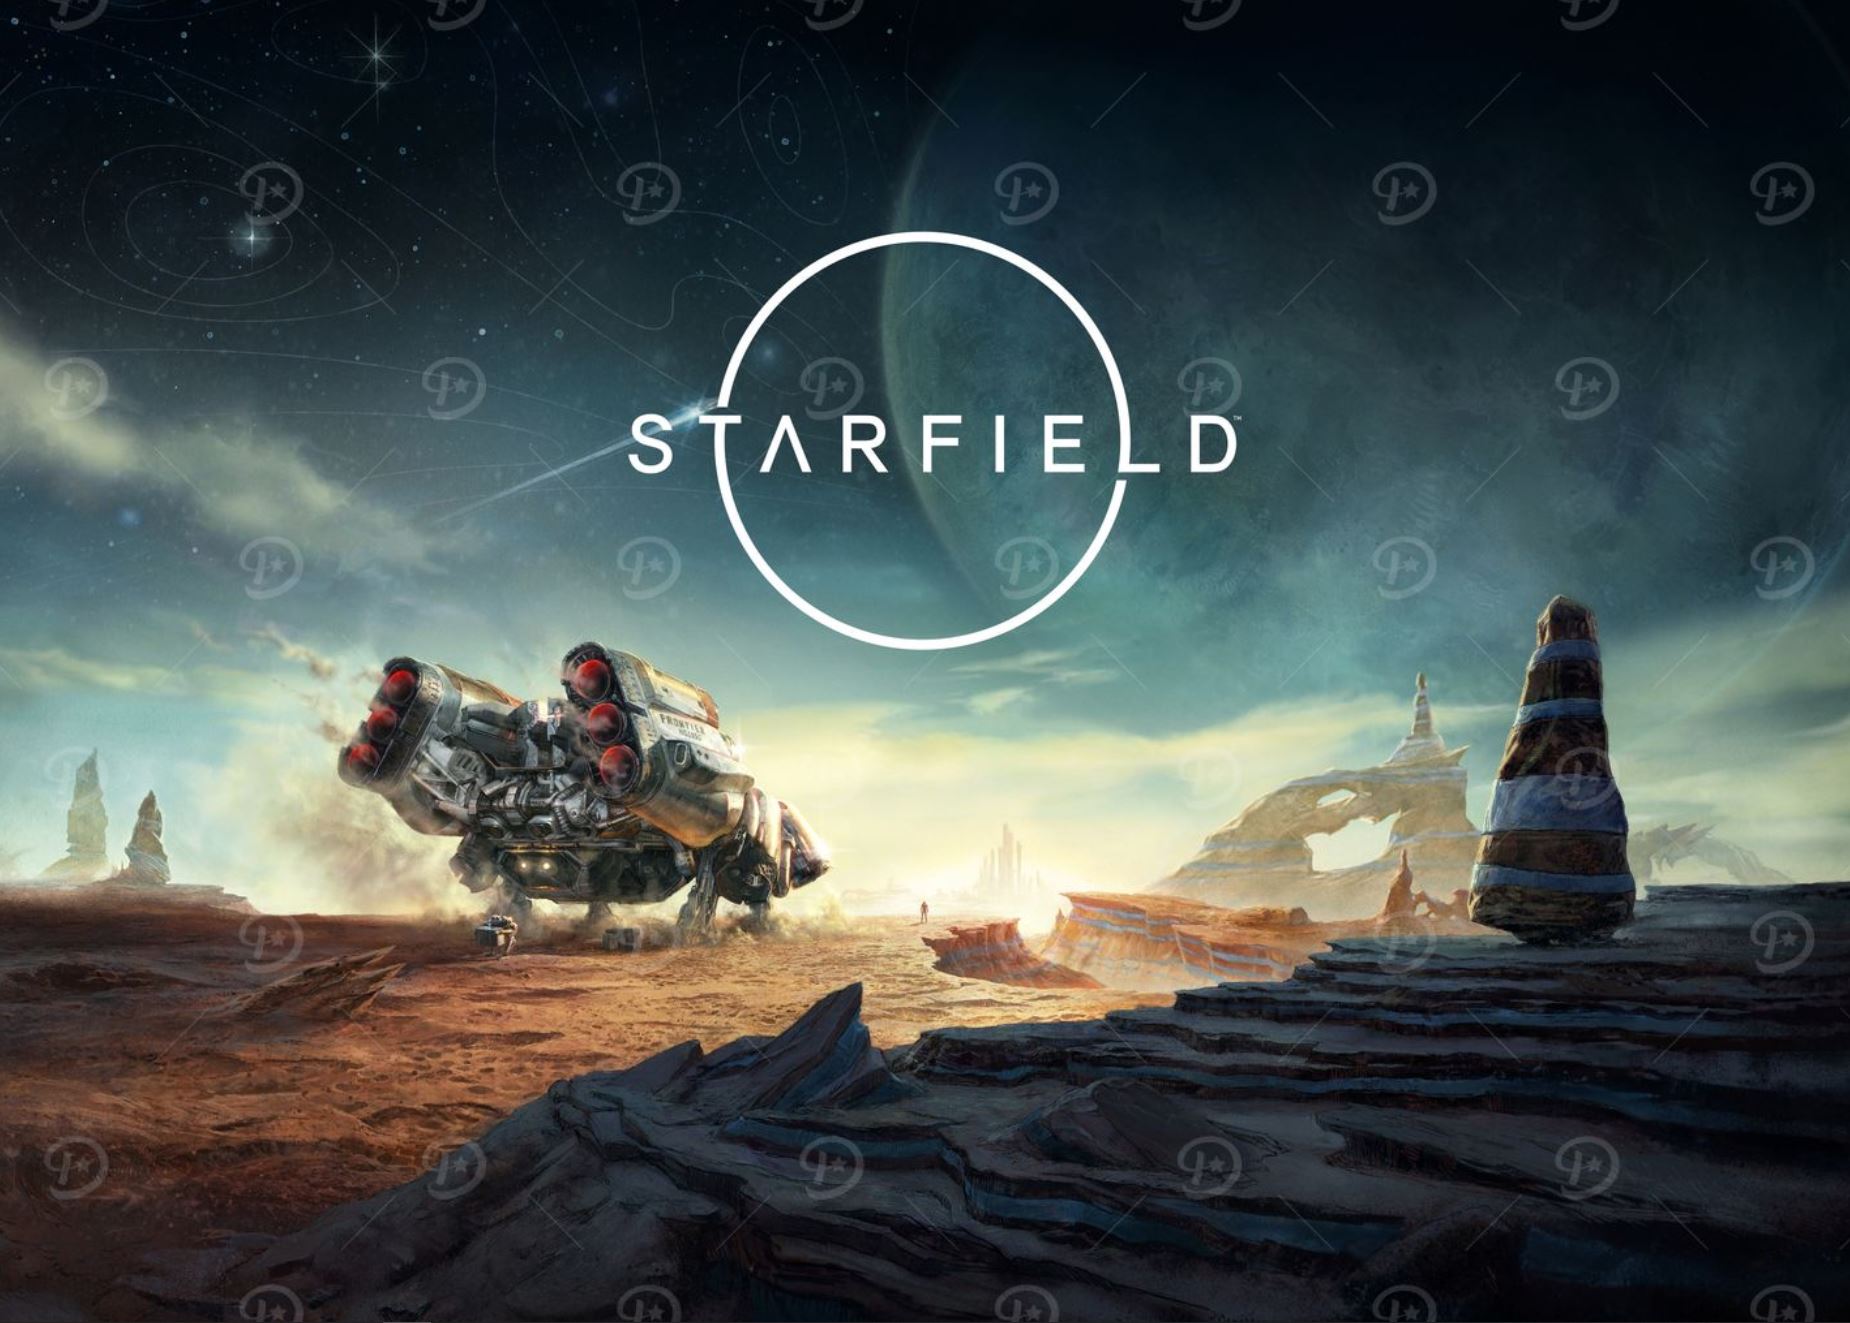 Here's an extended first look at Bethesda's Starfield